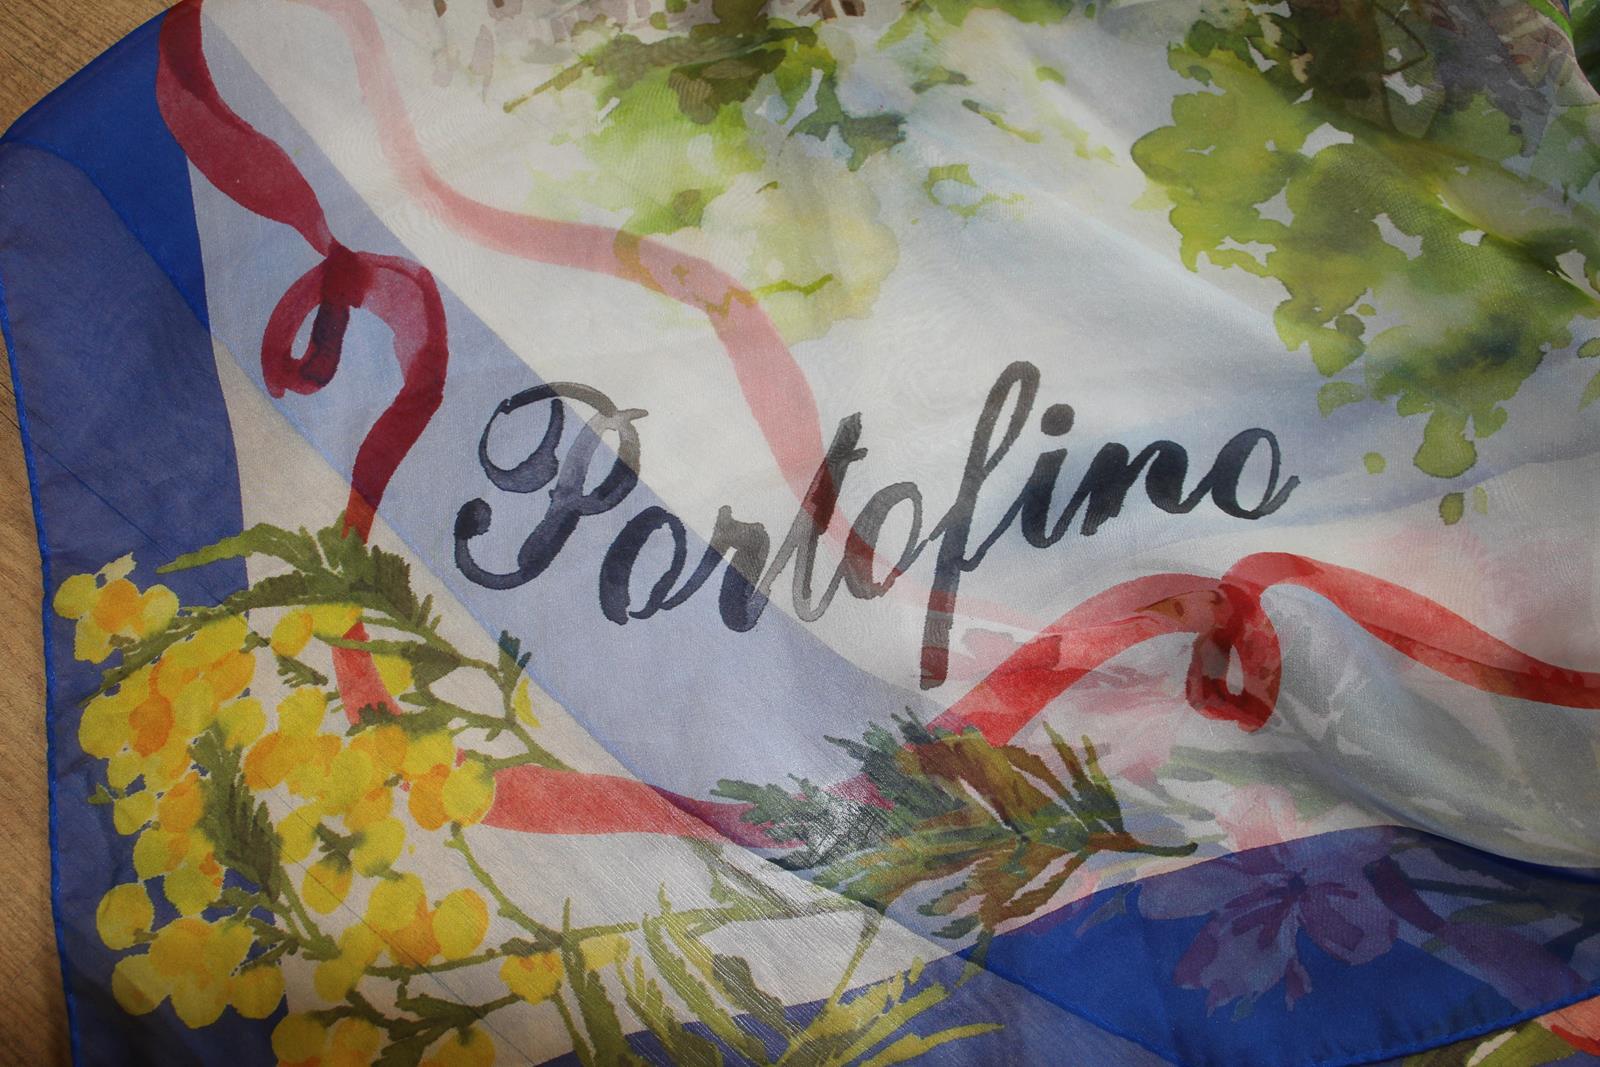 Beutiful Dolce&Gabbana scarf
Silk
Beautiful Portofino print
Cm 95 x 95 (37.40 x 37.40 inches)
Made in Italy
Worldwide express shipping included in the price !